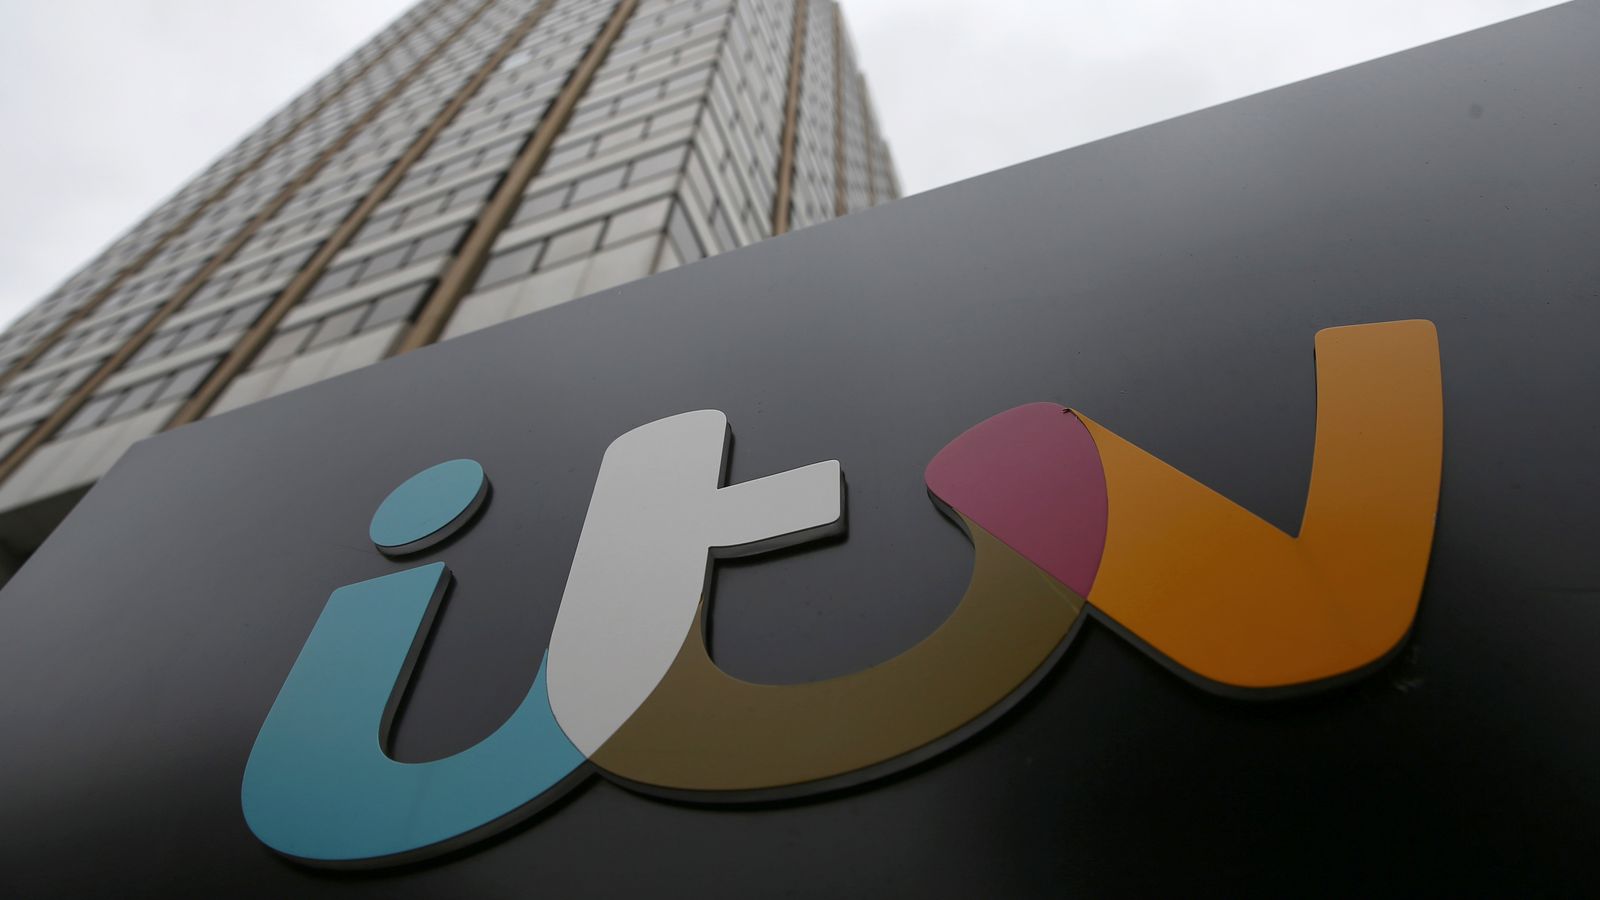 Itv Picks Firm To Screen Successors To Chairman Bazalgette Business News Sky News